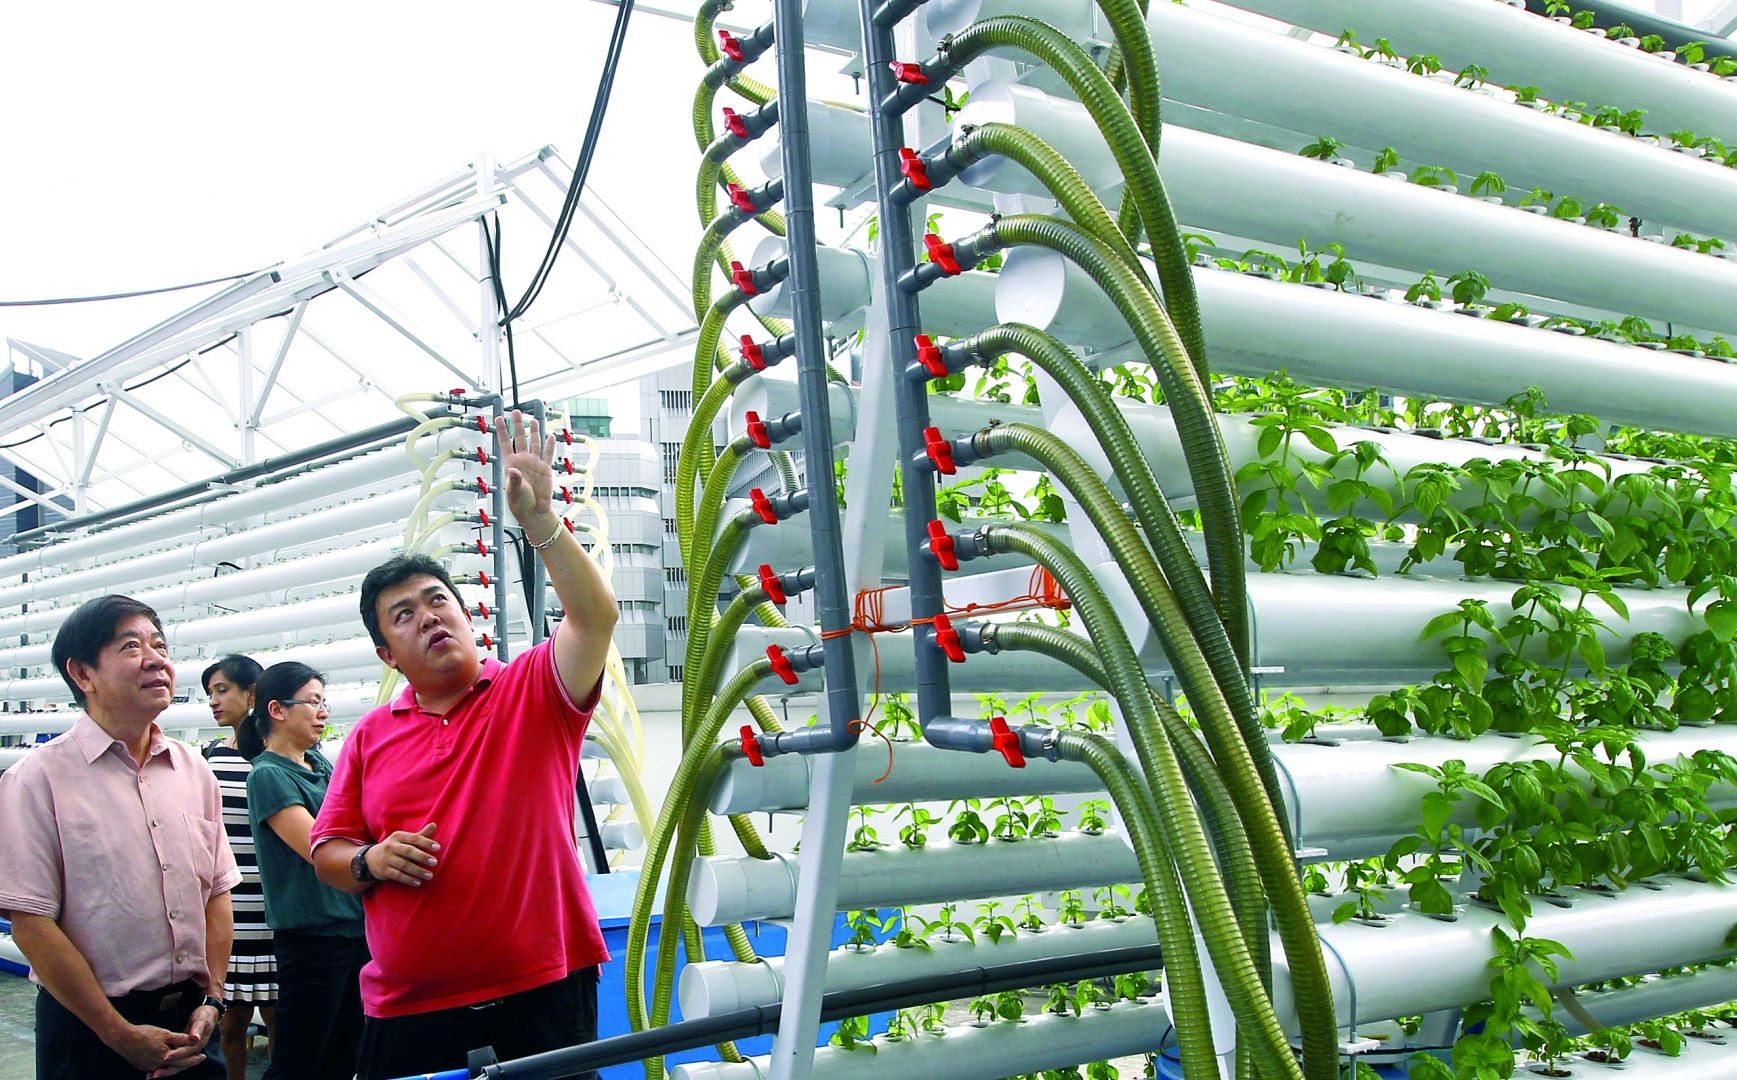 Vertical Rooftop Farm Changes The Way Hotels and Restaurateurs Source Their Ingredients...